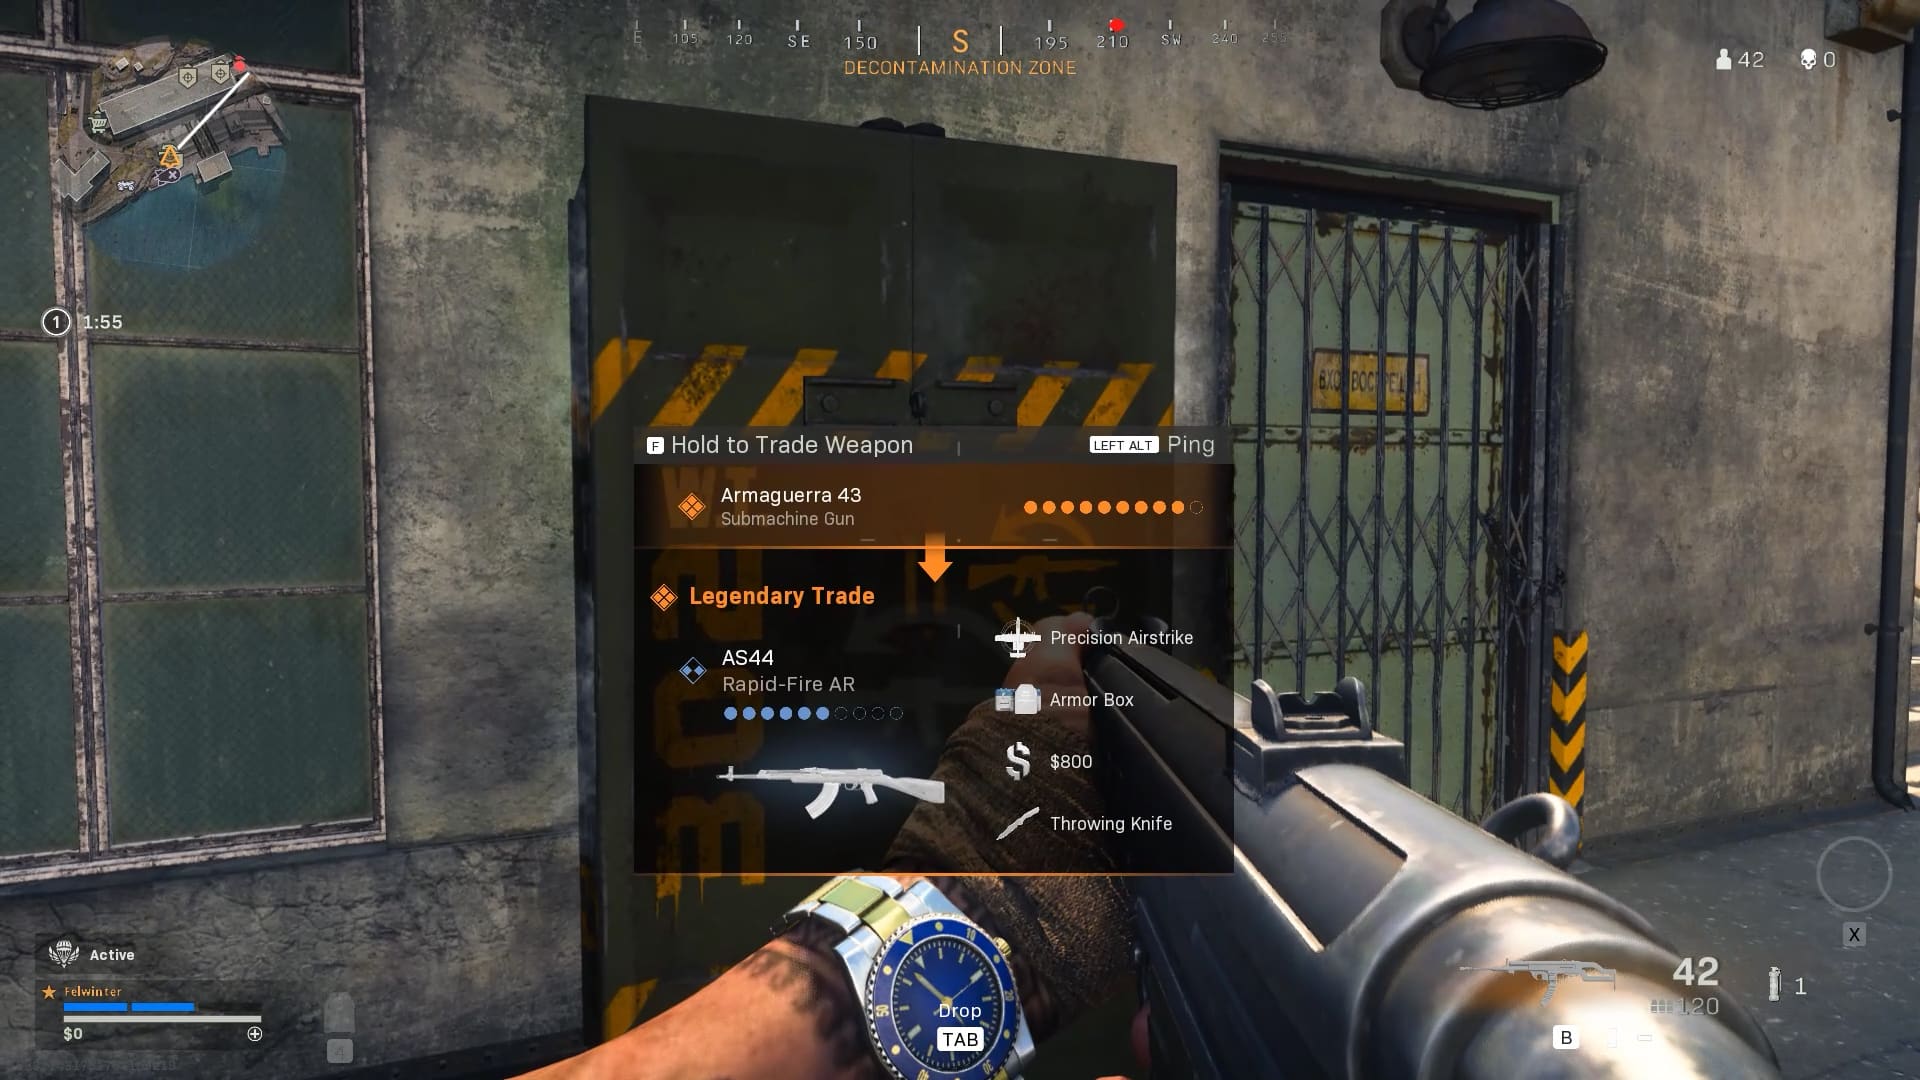 Trade in window when a player approaches the weapon trade station in Warzone